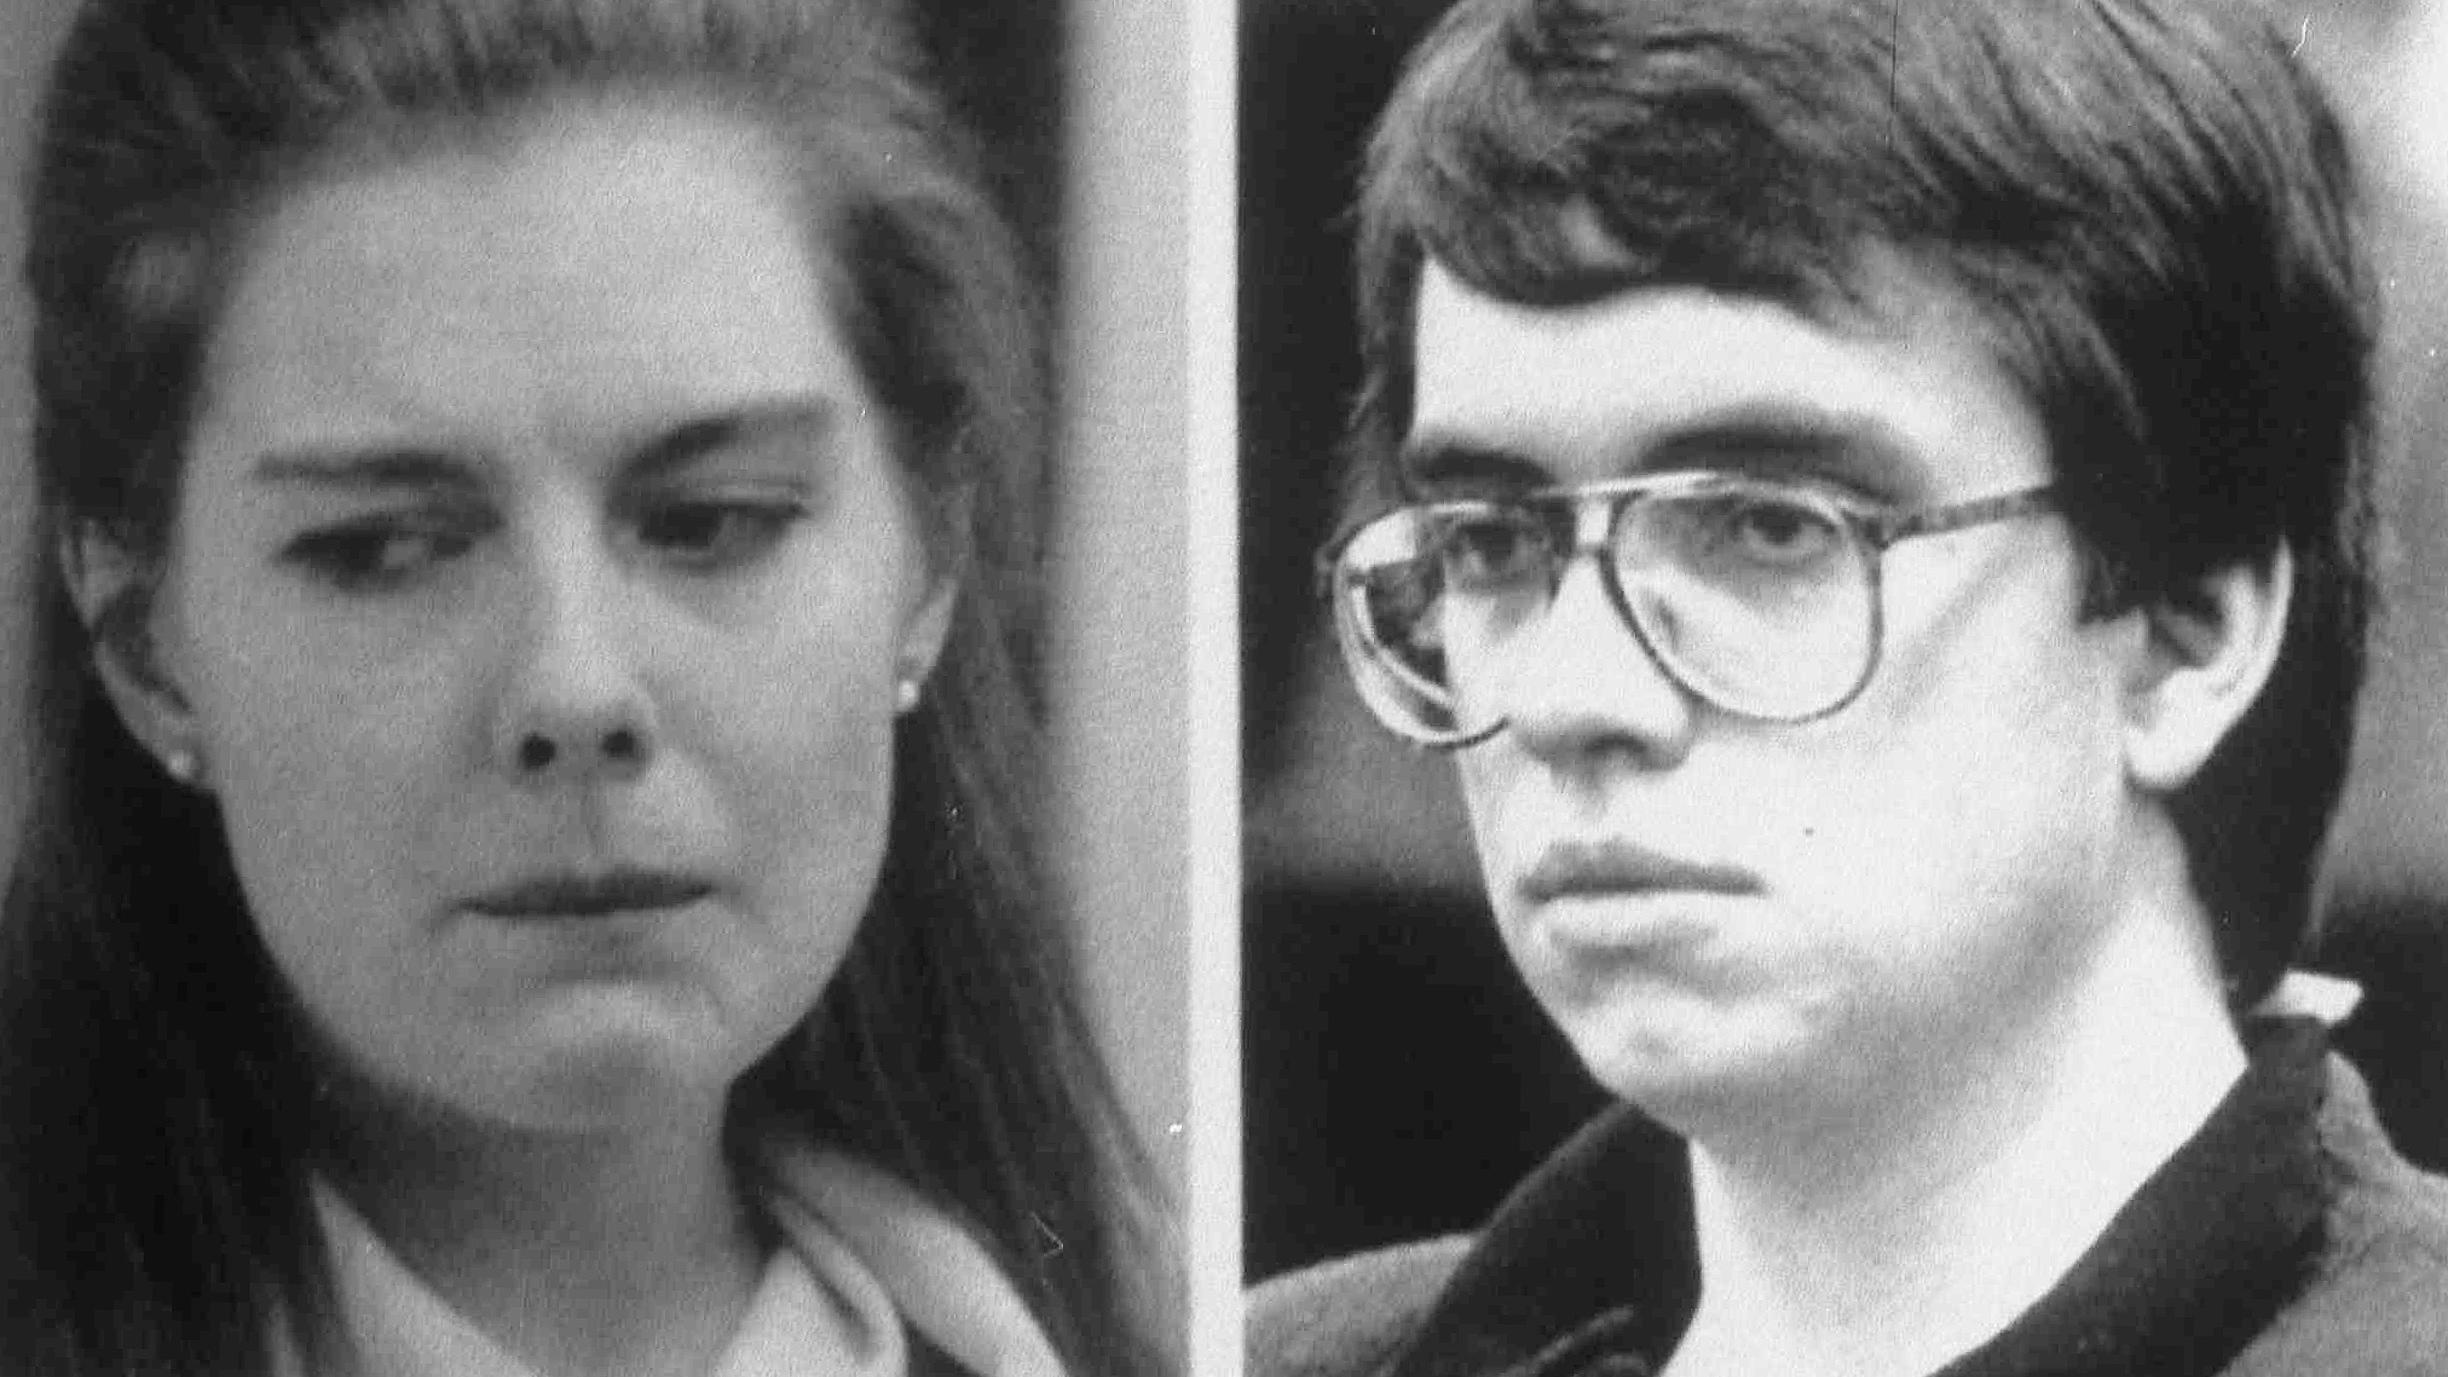 Combo picture, released June 25, 1990, of Elizabeth Haysom, left, and Jens Soering, who have been arrested for the murder of Elizabeth's parents at their home in Bedord County, Va. Image of Haysom is 1987 filer, and Soering is 1990 filer. (AP Photo) 